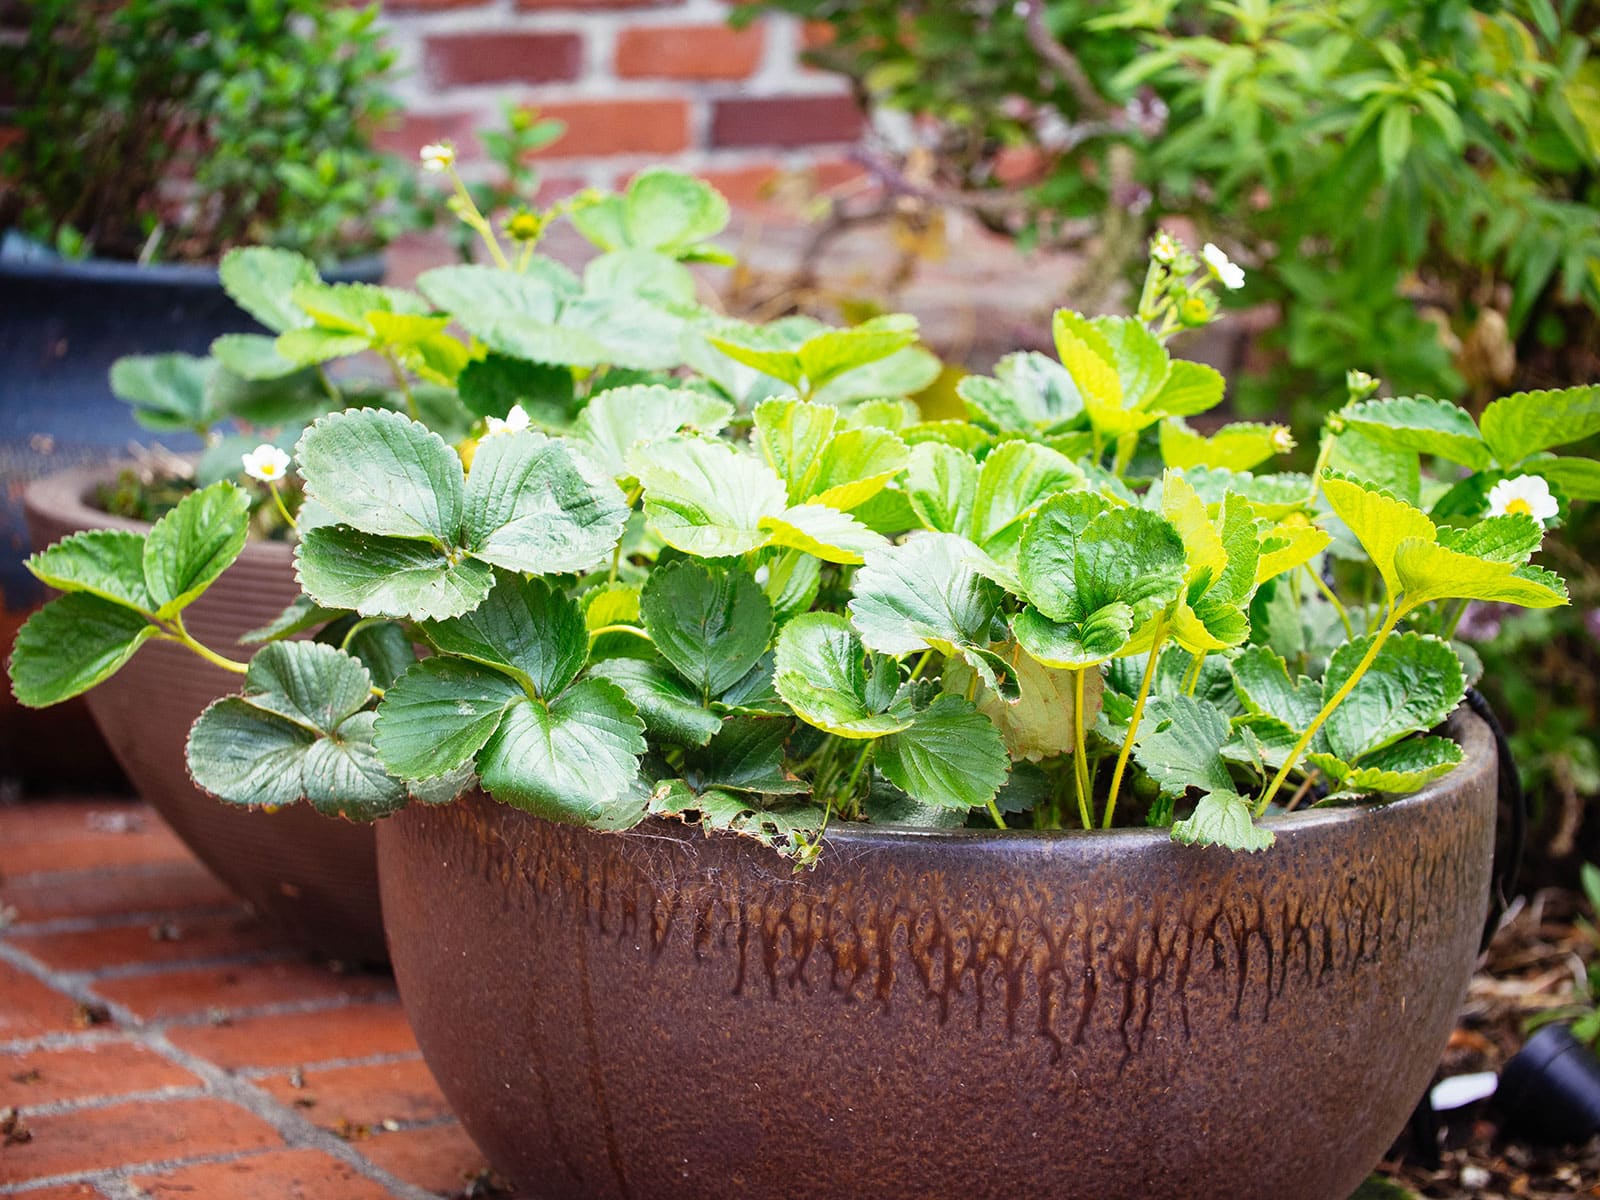 A strawberry plant growing in a wide, dark brown ceramic planter in a garden